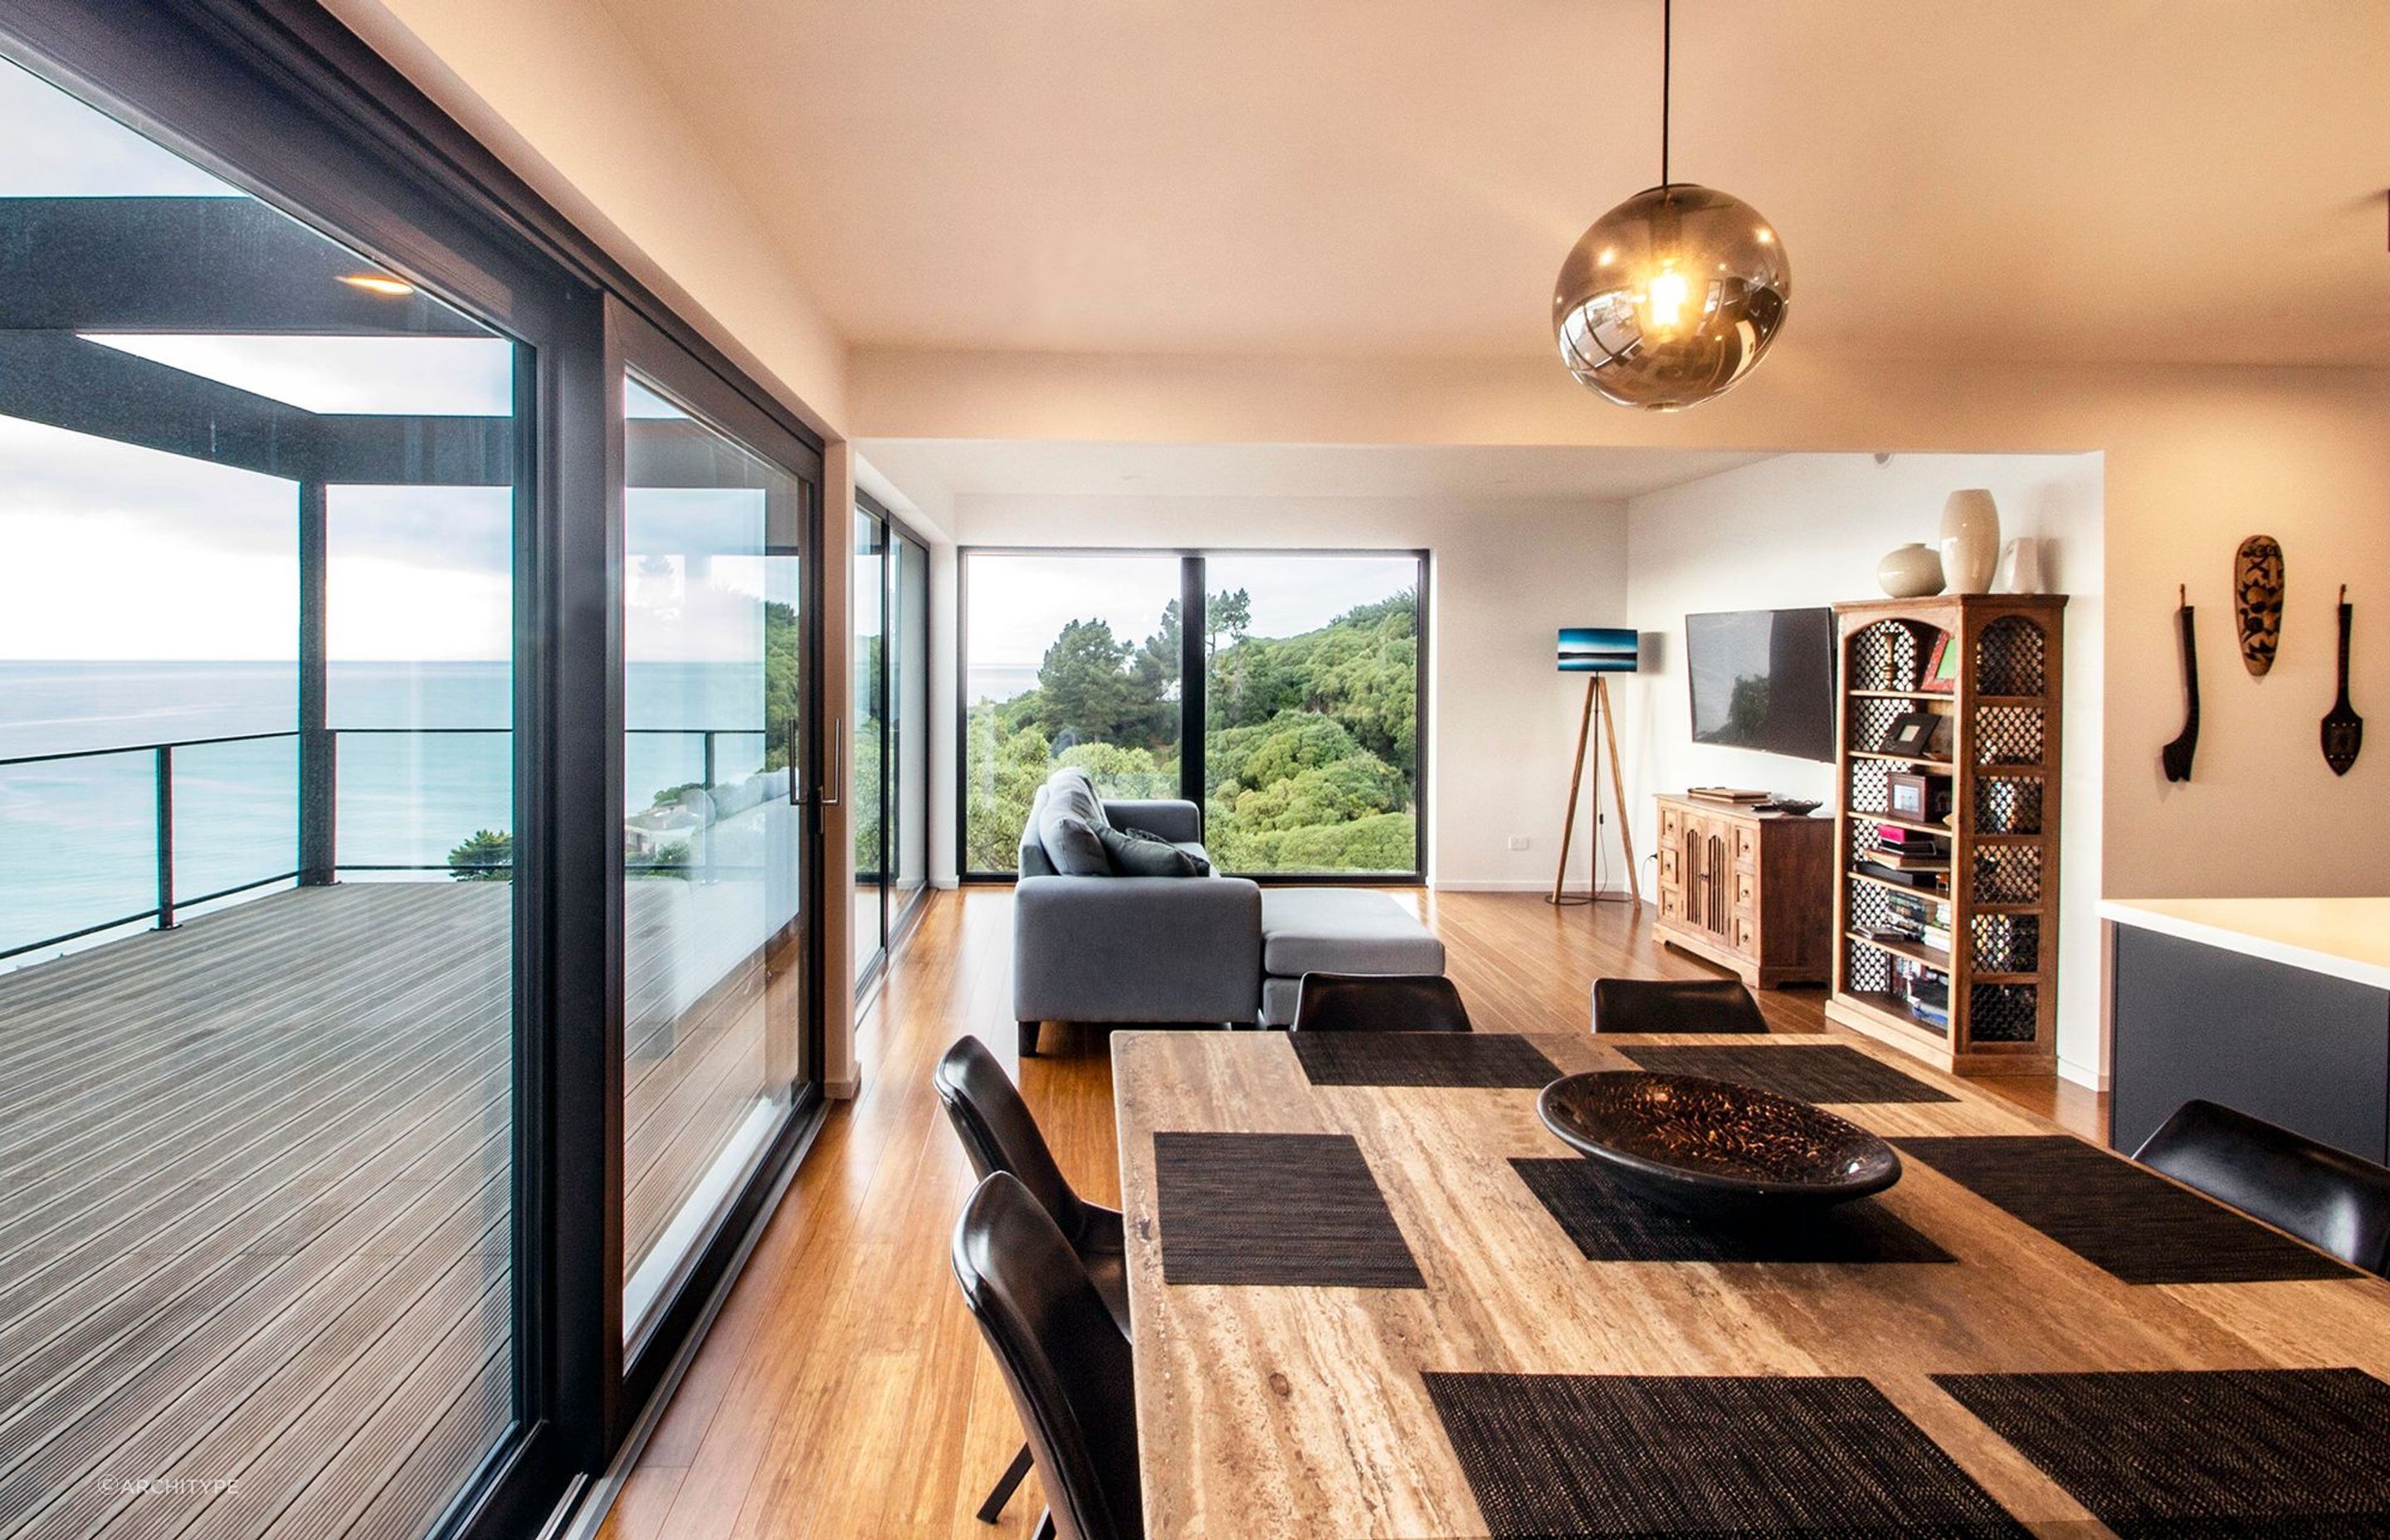 Sliding doors allow an easy transition from indoors to outdoors for hosting and entertaining